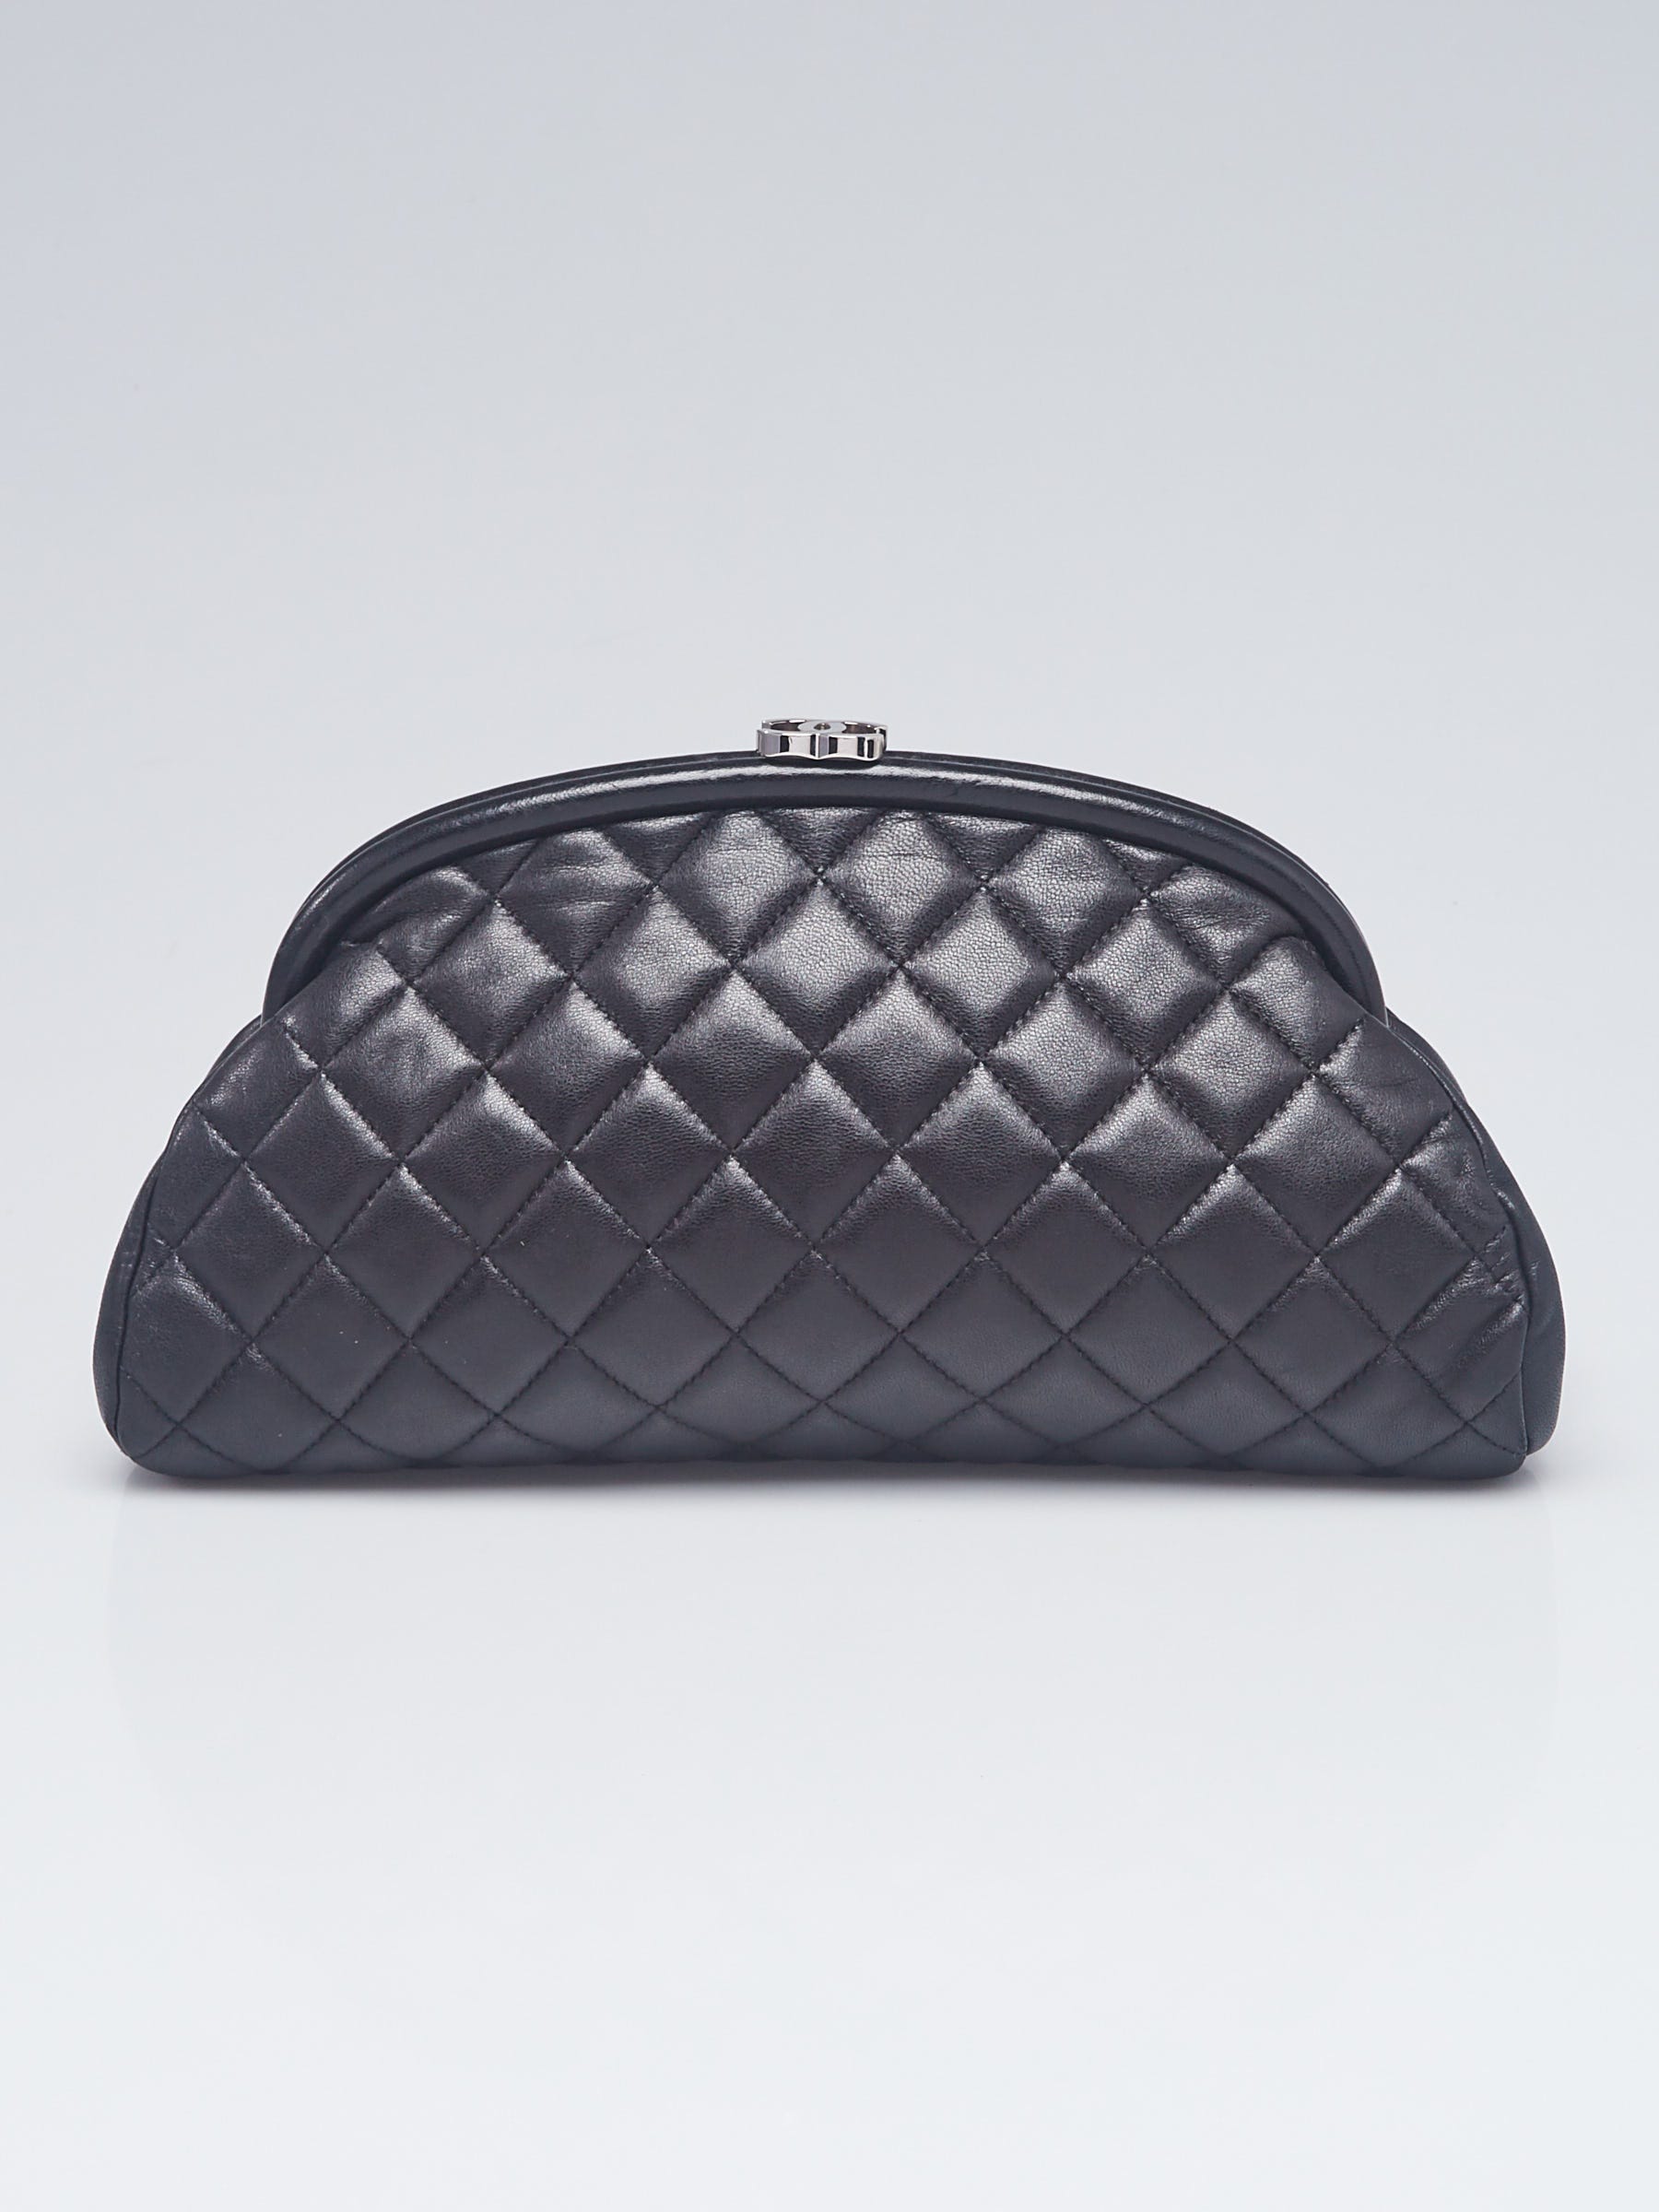 Chanel Black Quilted Lambskin Leather Timeless Clutch Bag - Yoogi's Closet